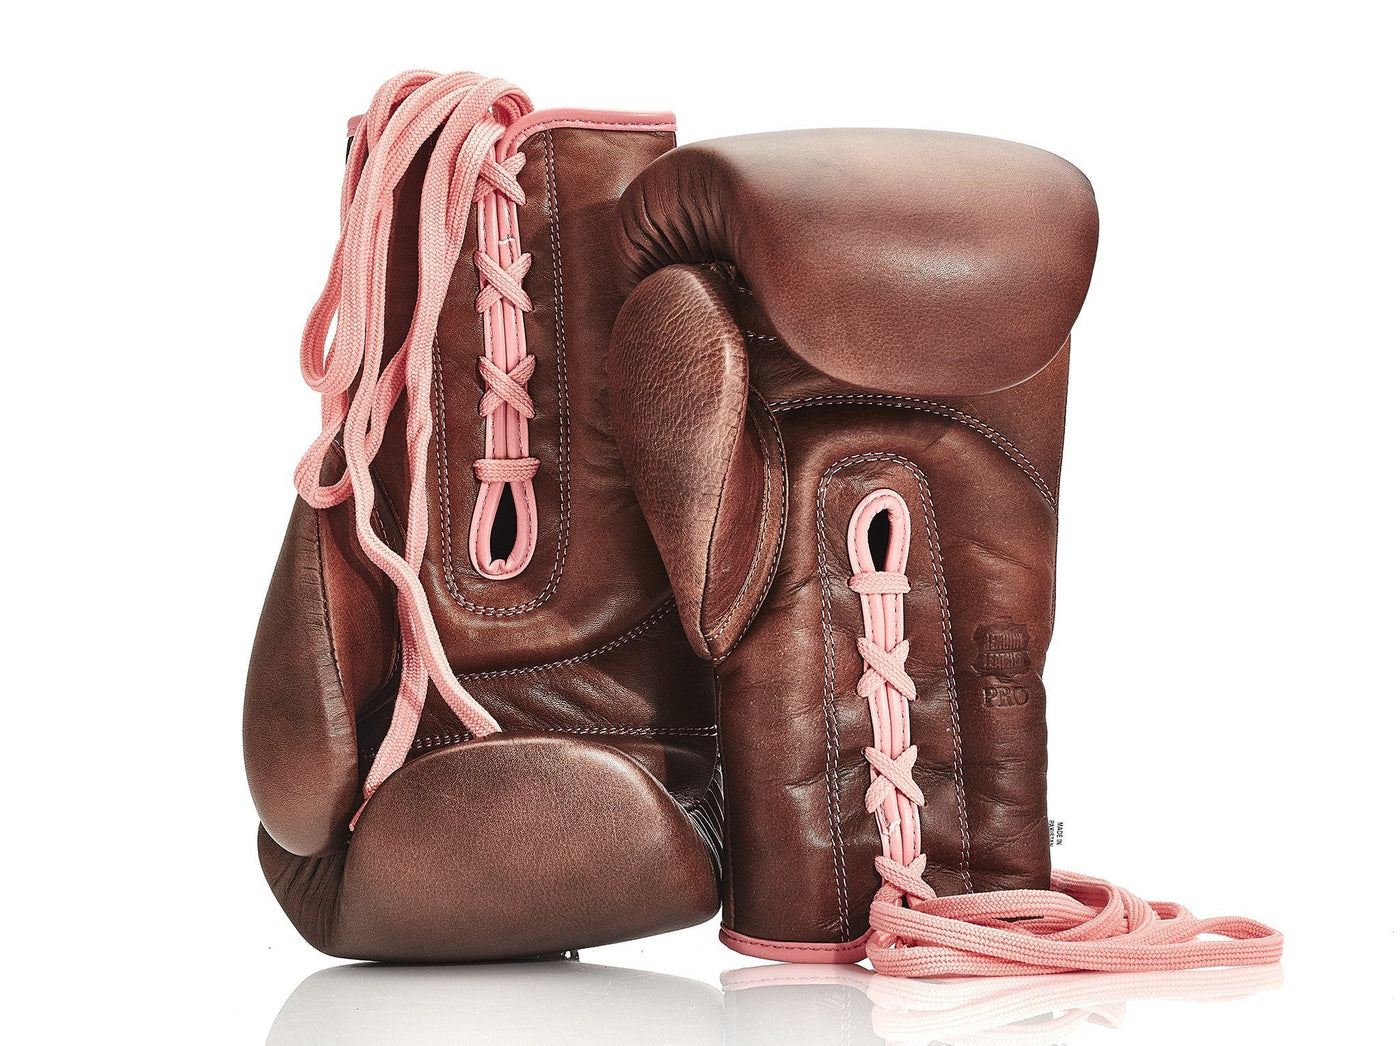 PRO Ladies Heritage Brown Leather Boxing Gloves (Lace Up) - MODEST VINTAGE PLAYER LTD